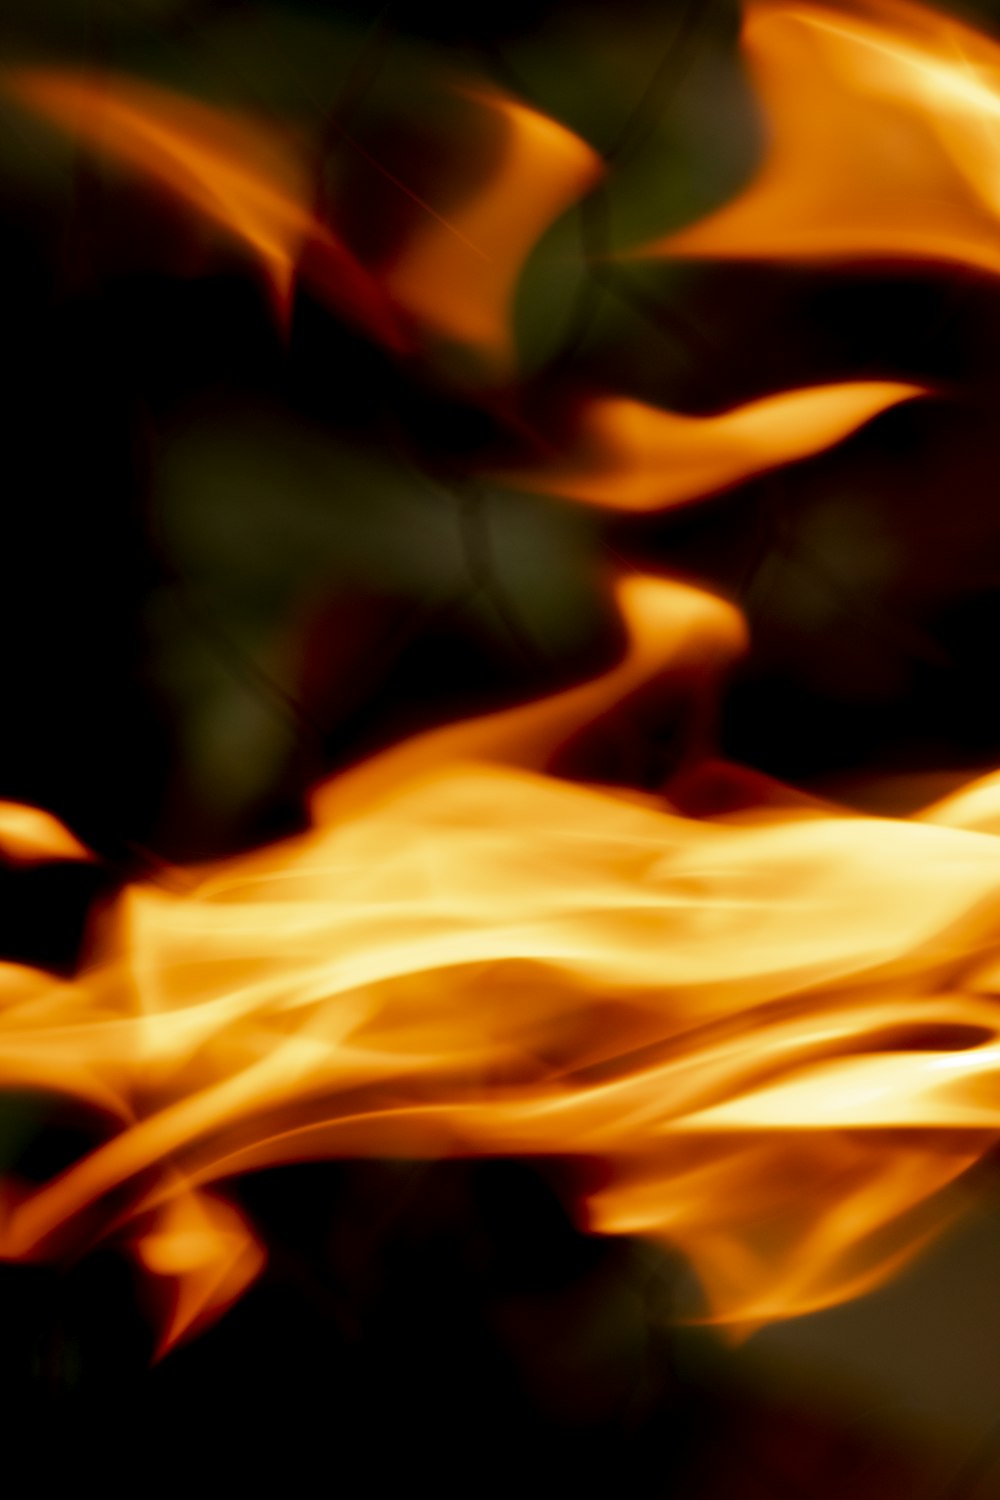 orange fire in close up photography